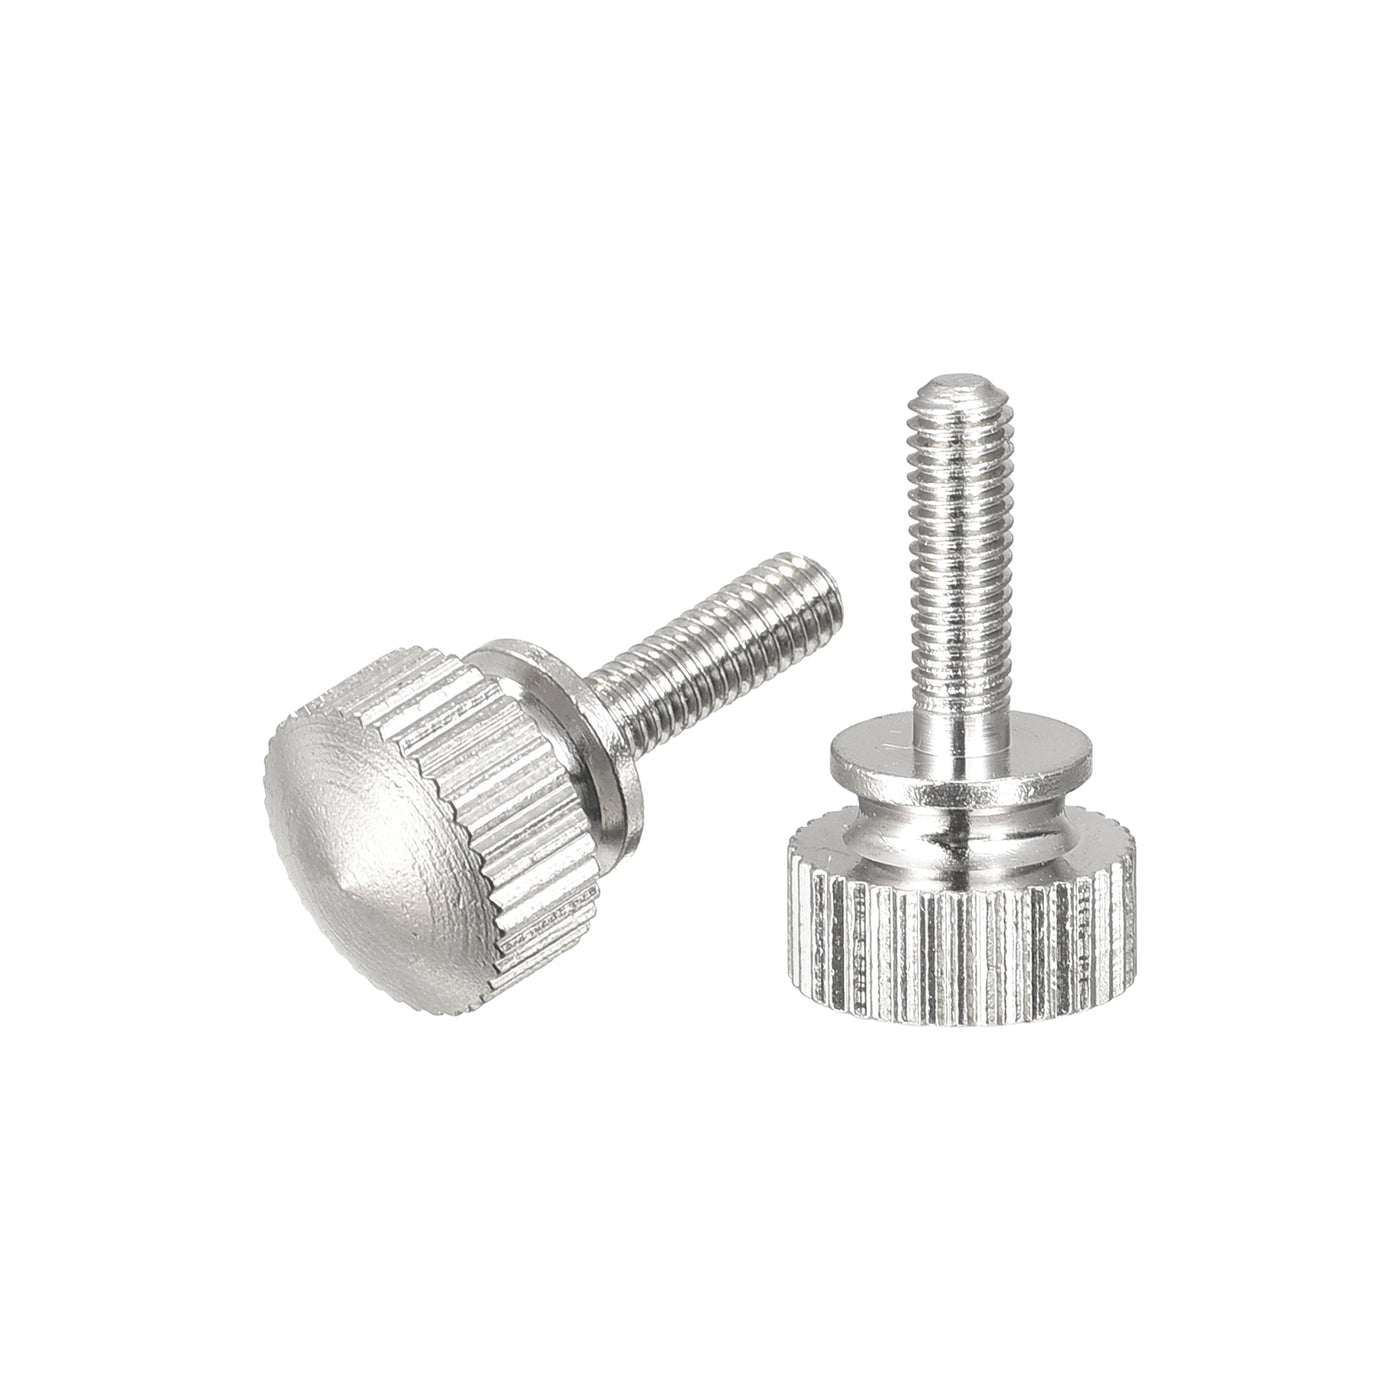 uxcell Uxcell Knurled Thumb Screws, M3x10mm Brass Shoulder Bolts Grip Knobs Fasteners, Nickel Plated 2Pcs